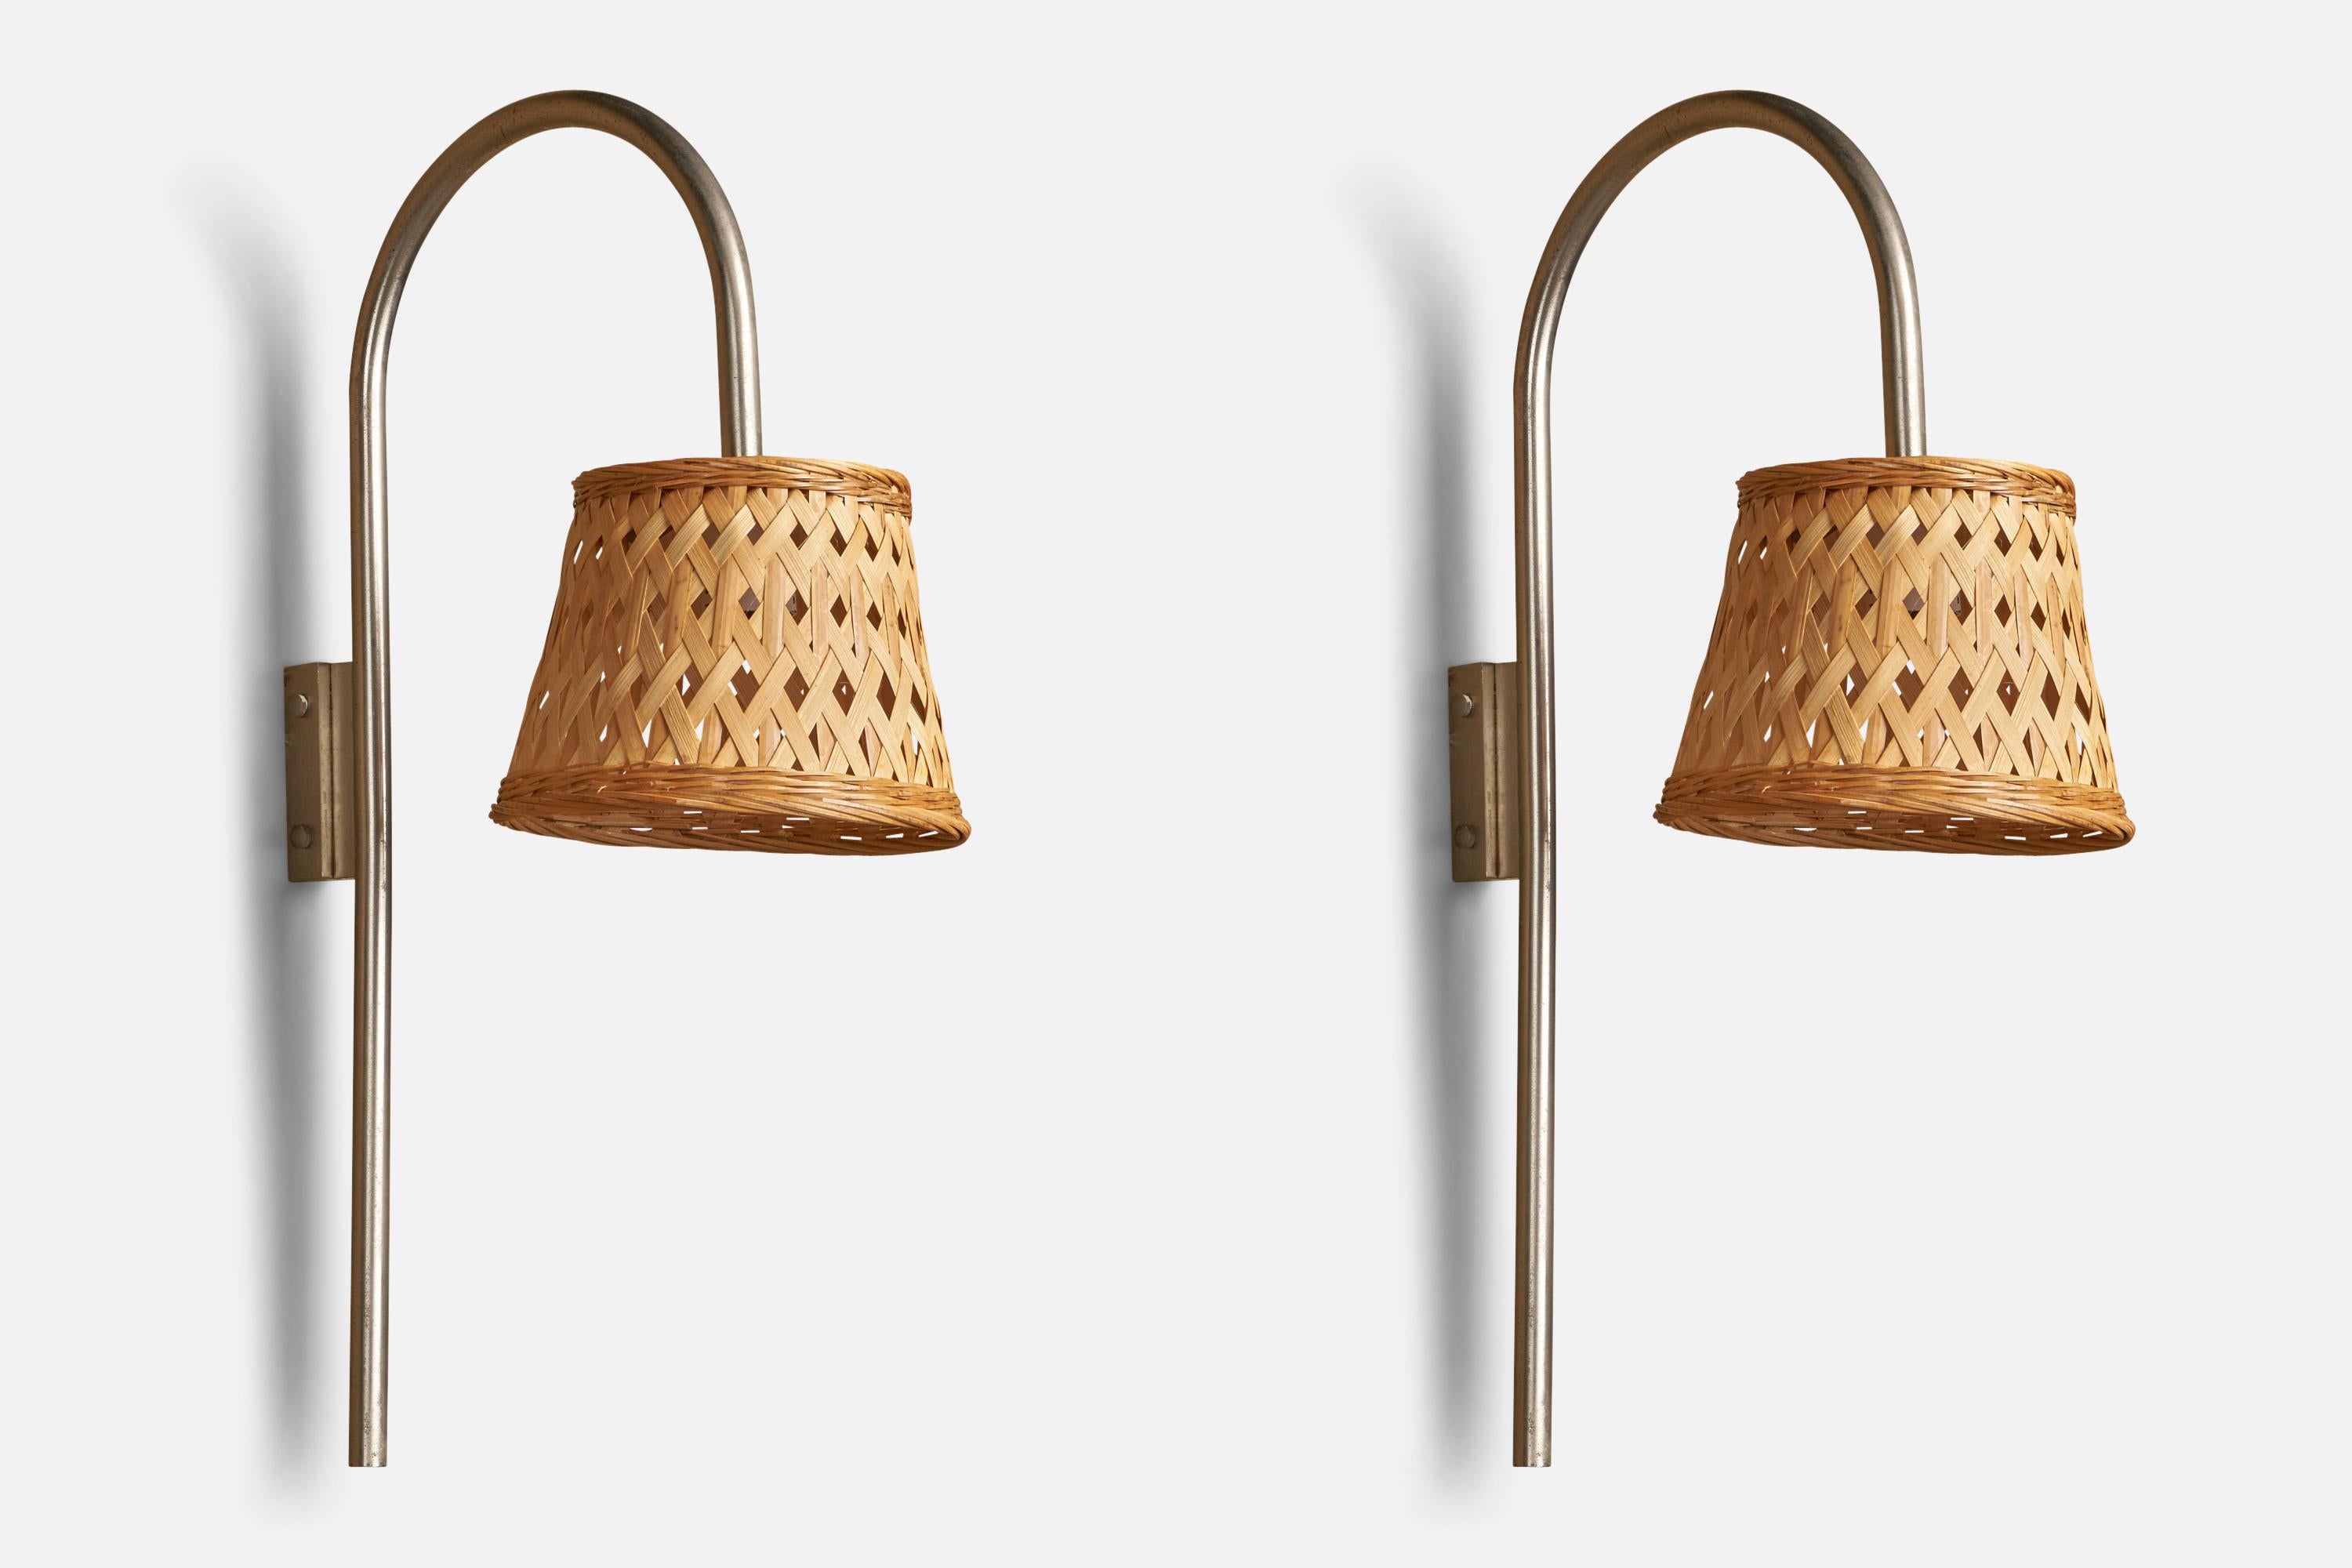 A pair of nickel and rattan wall lights, designed and produced in Italy, c. 1960s.

Overall Dimensions (inches): 24